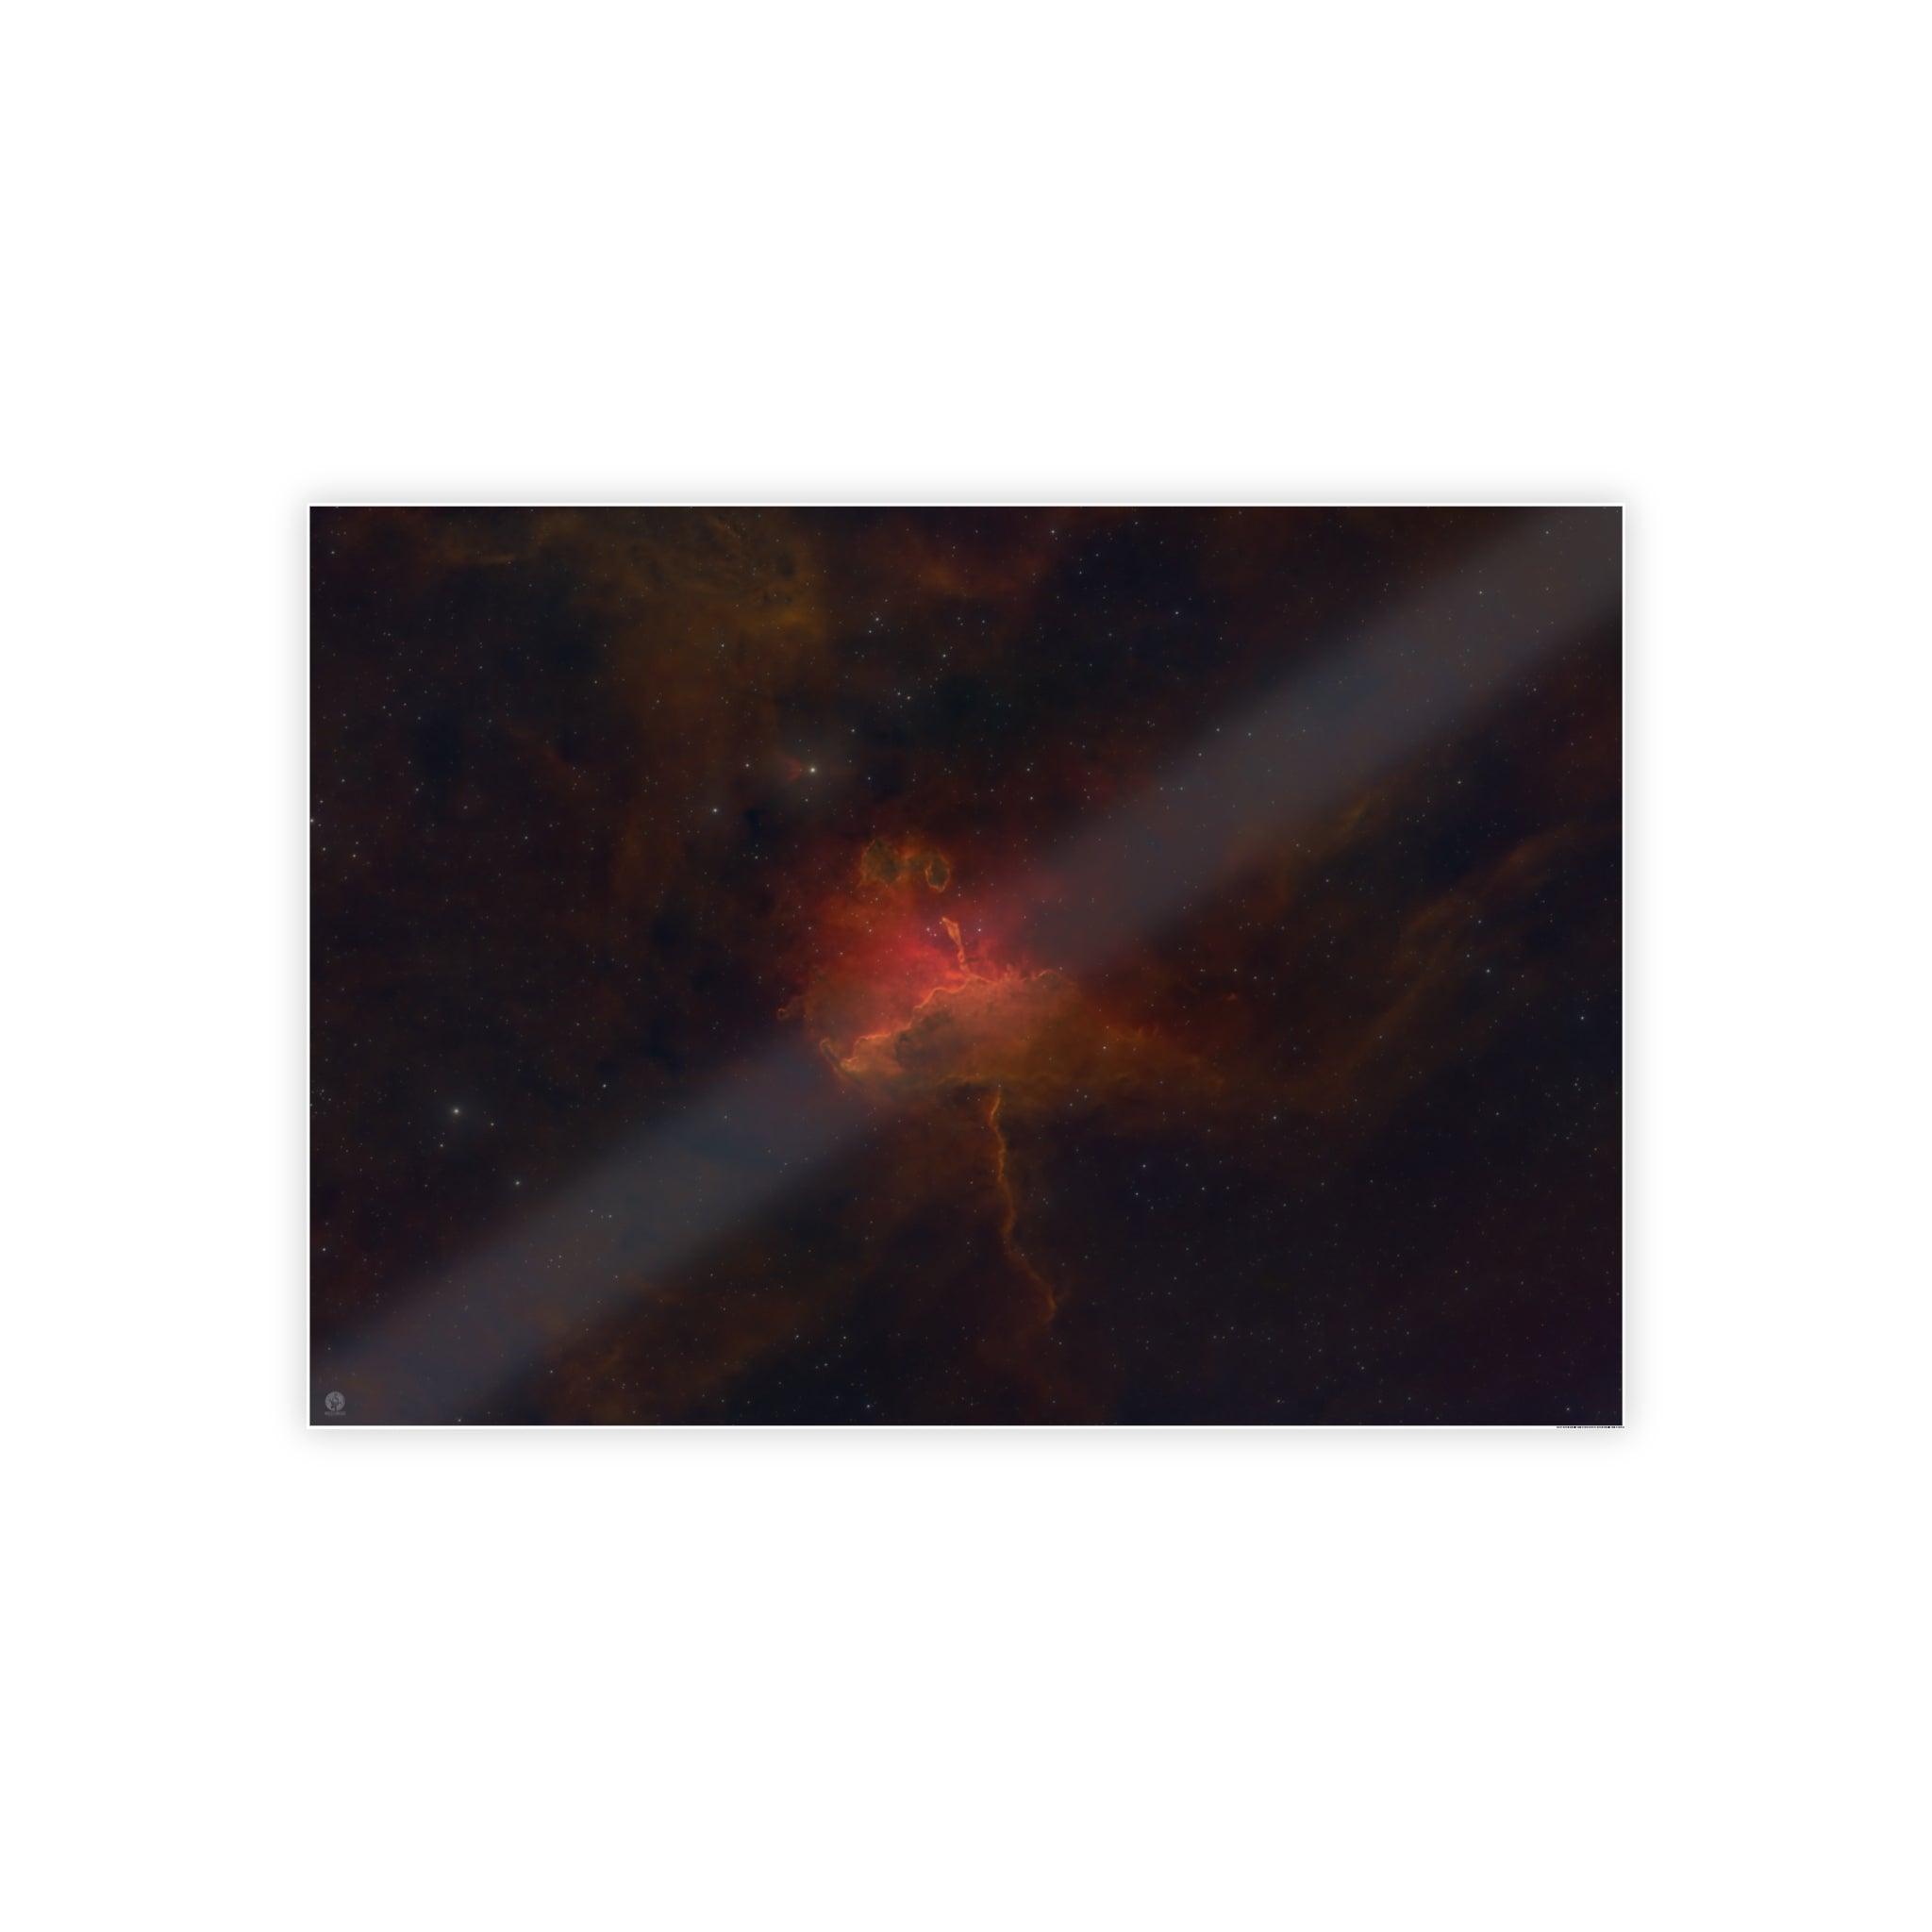 Poster of the Spider Nebula (SH2-234)